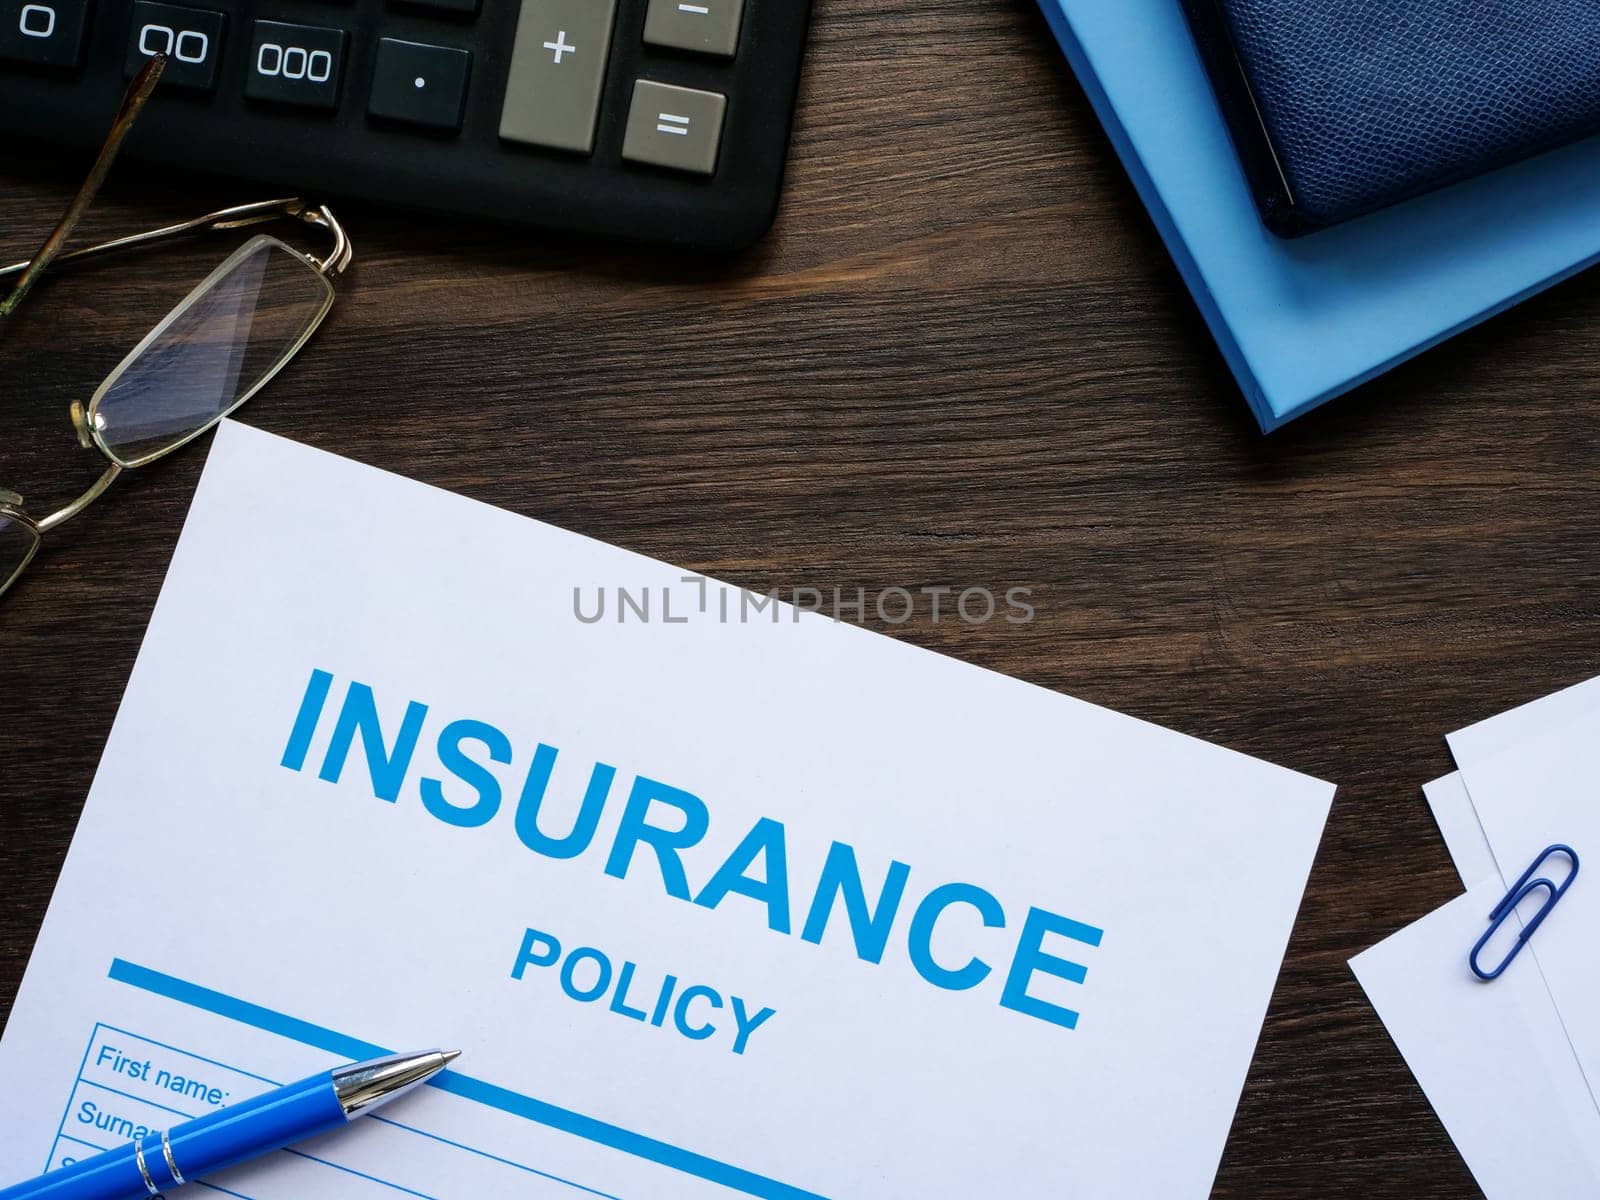 Insurance policy with calculator and notepads.